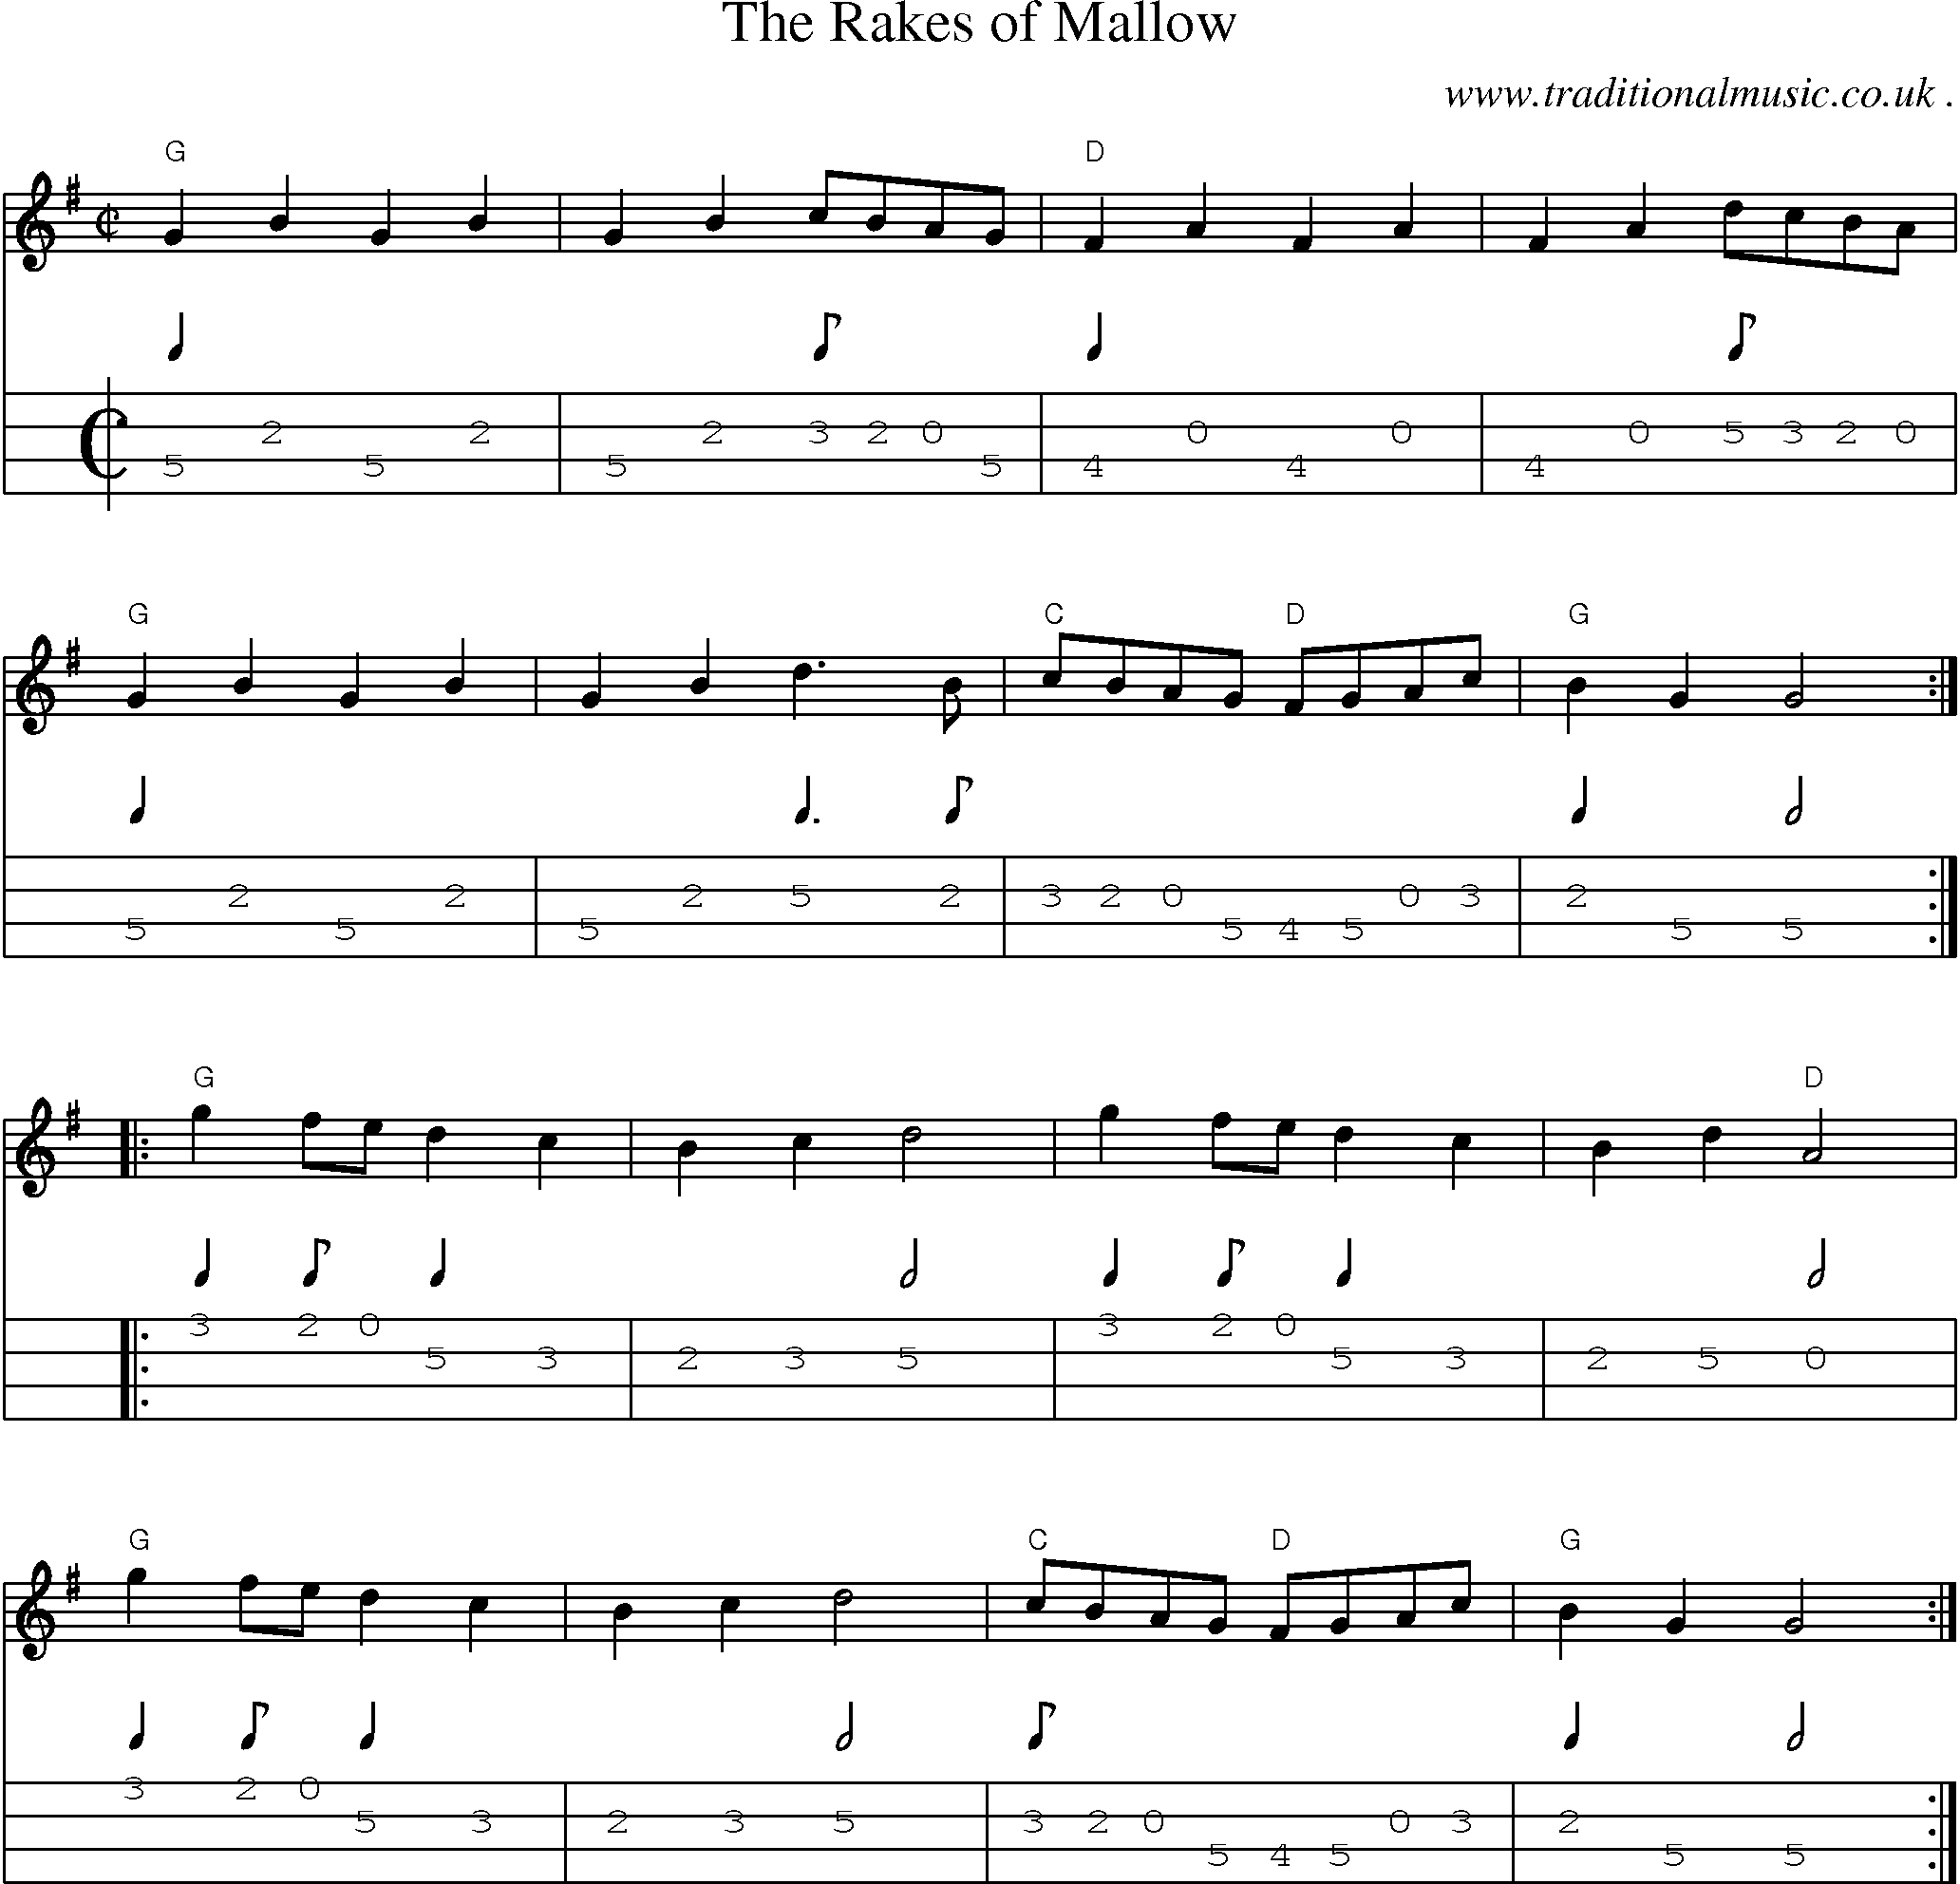 Music Score and Guitar Tabs for The Rakes Of Mallow